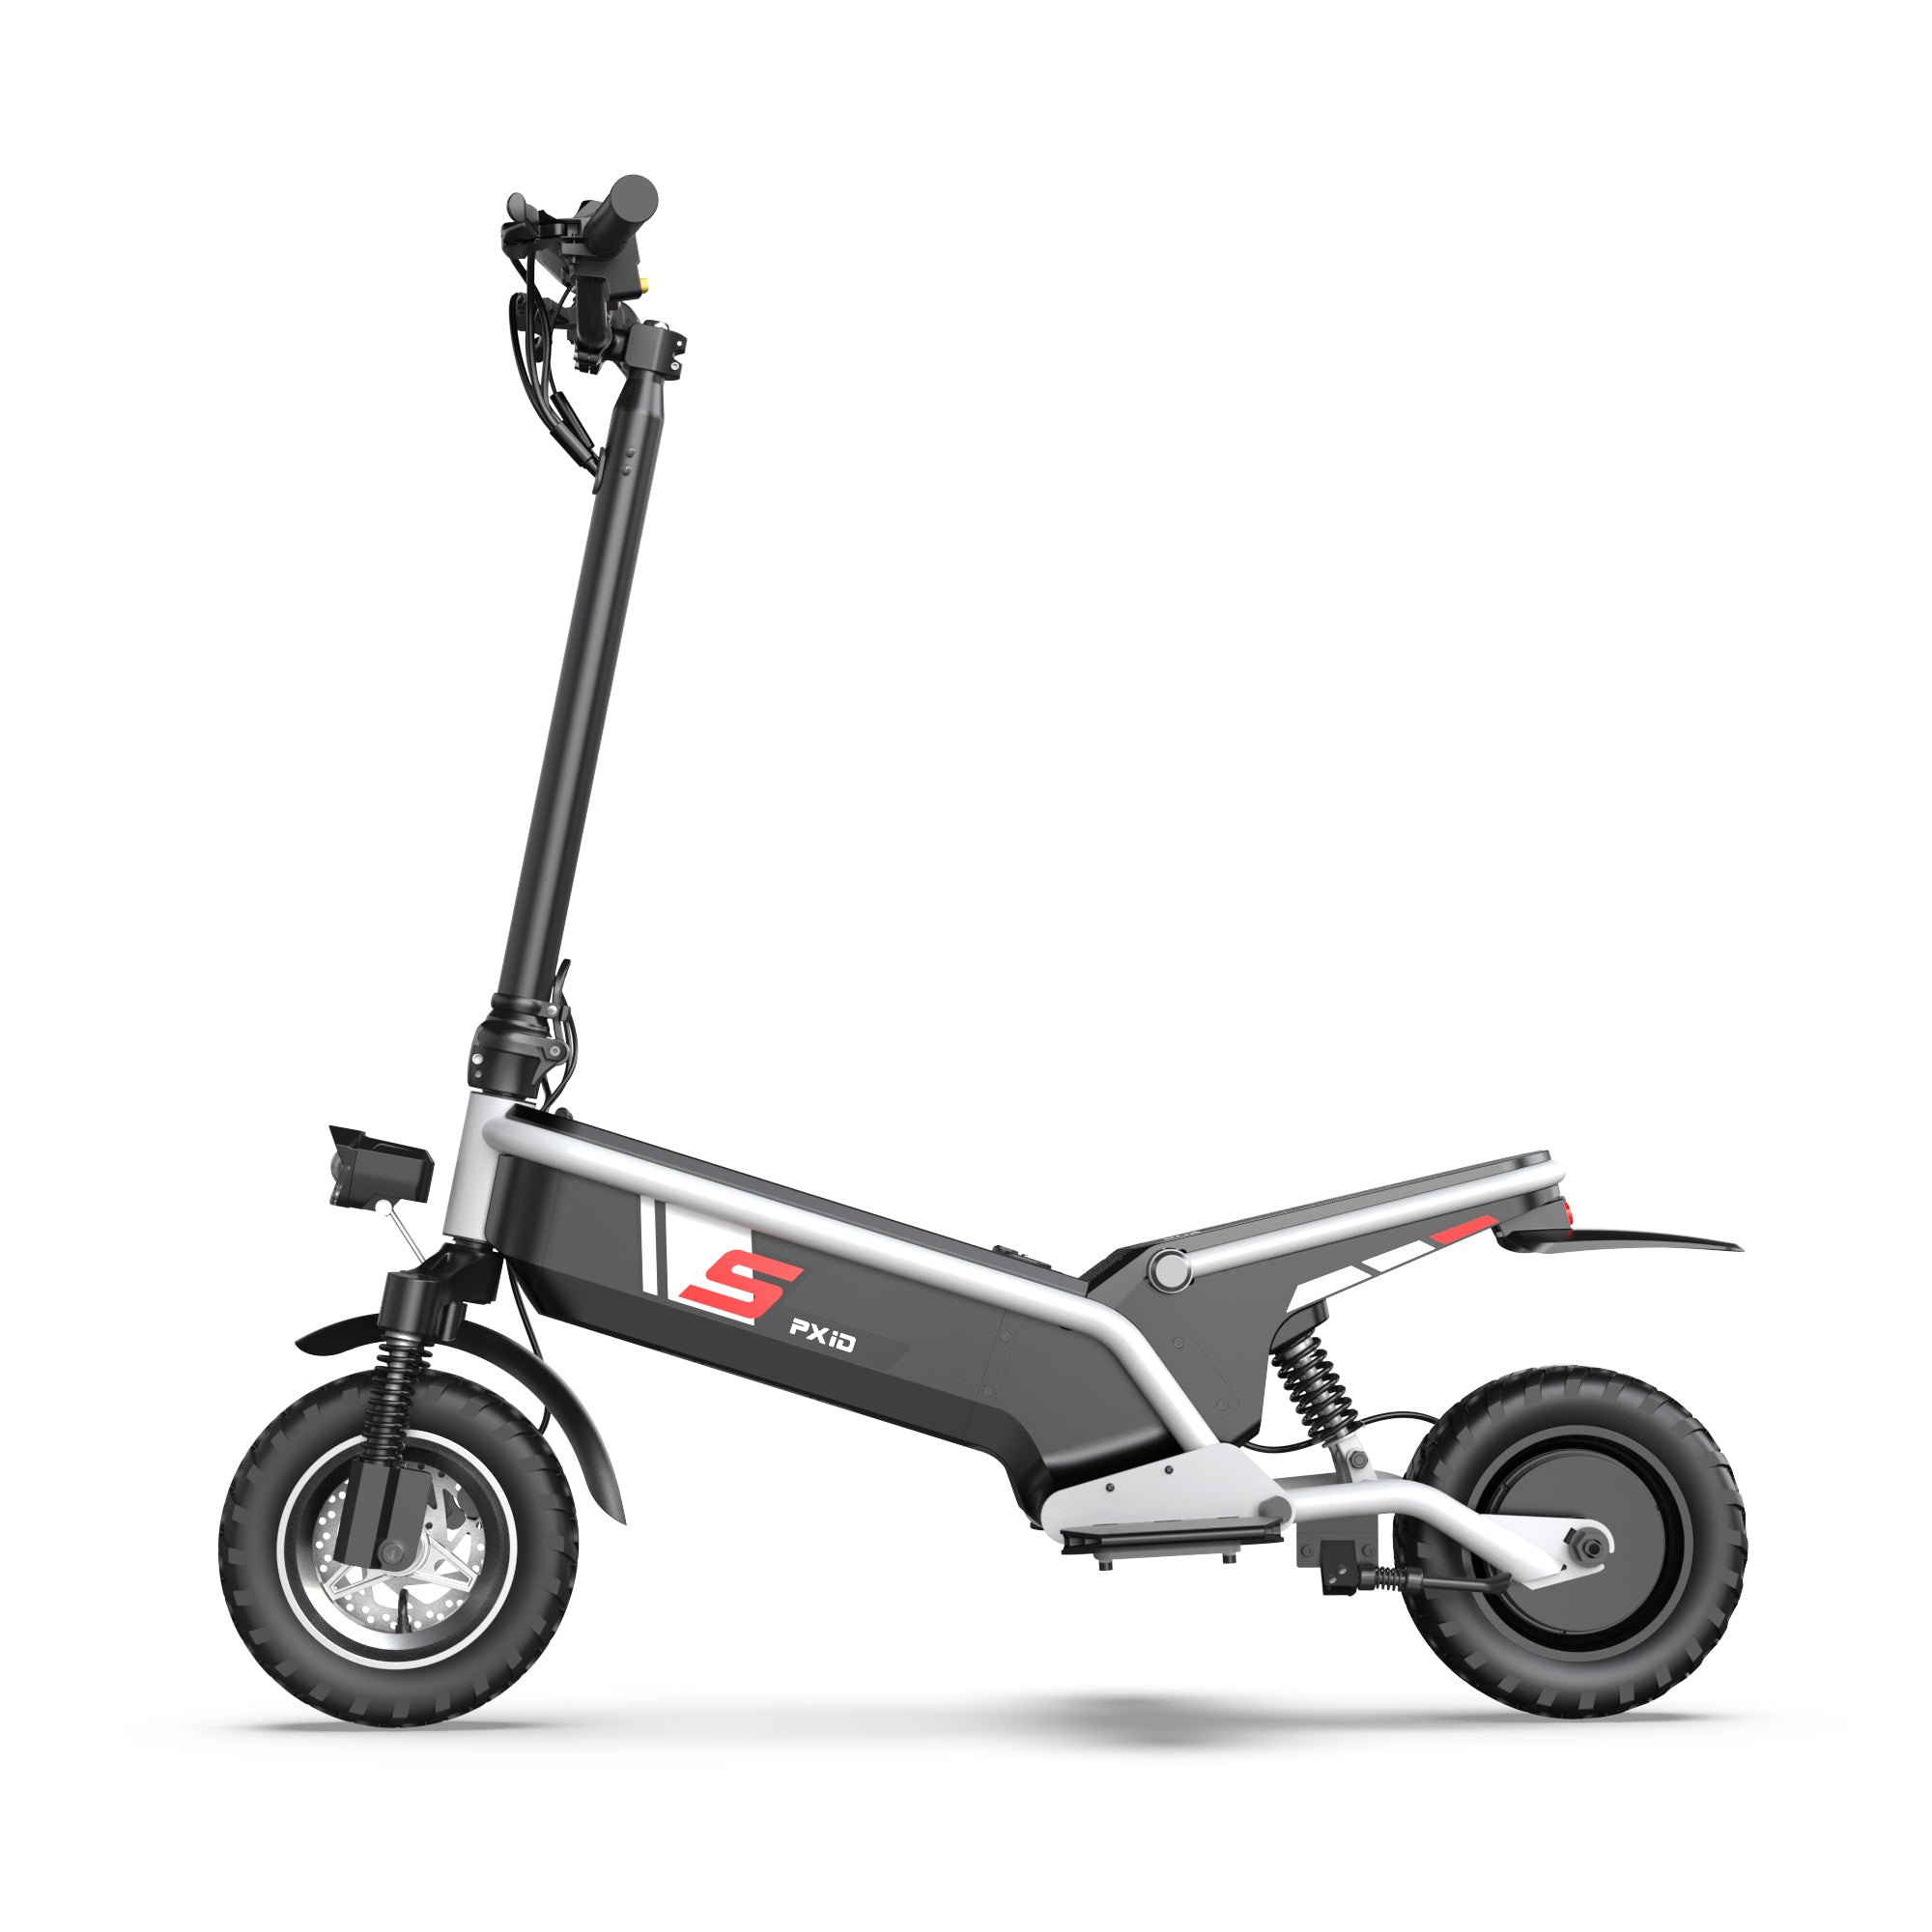 500W 48V Motor Off Road Electric Scooter With Seat – pxidbike